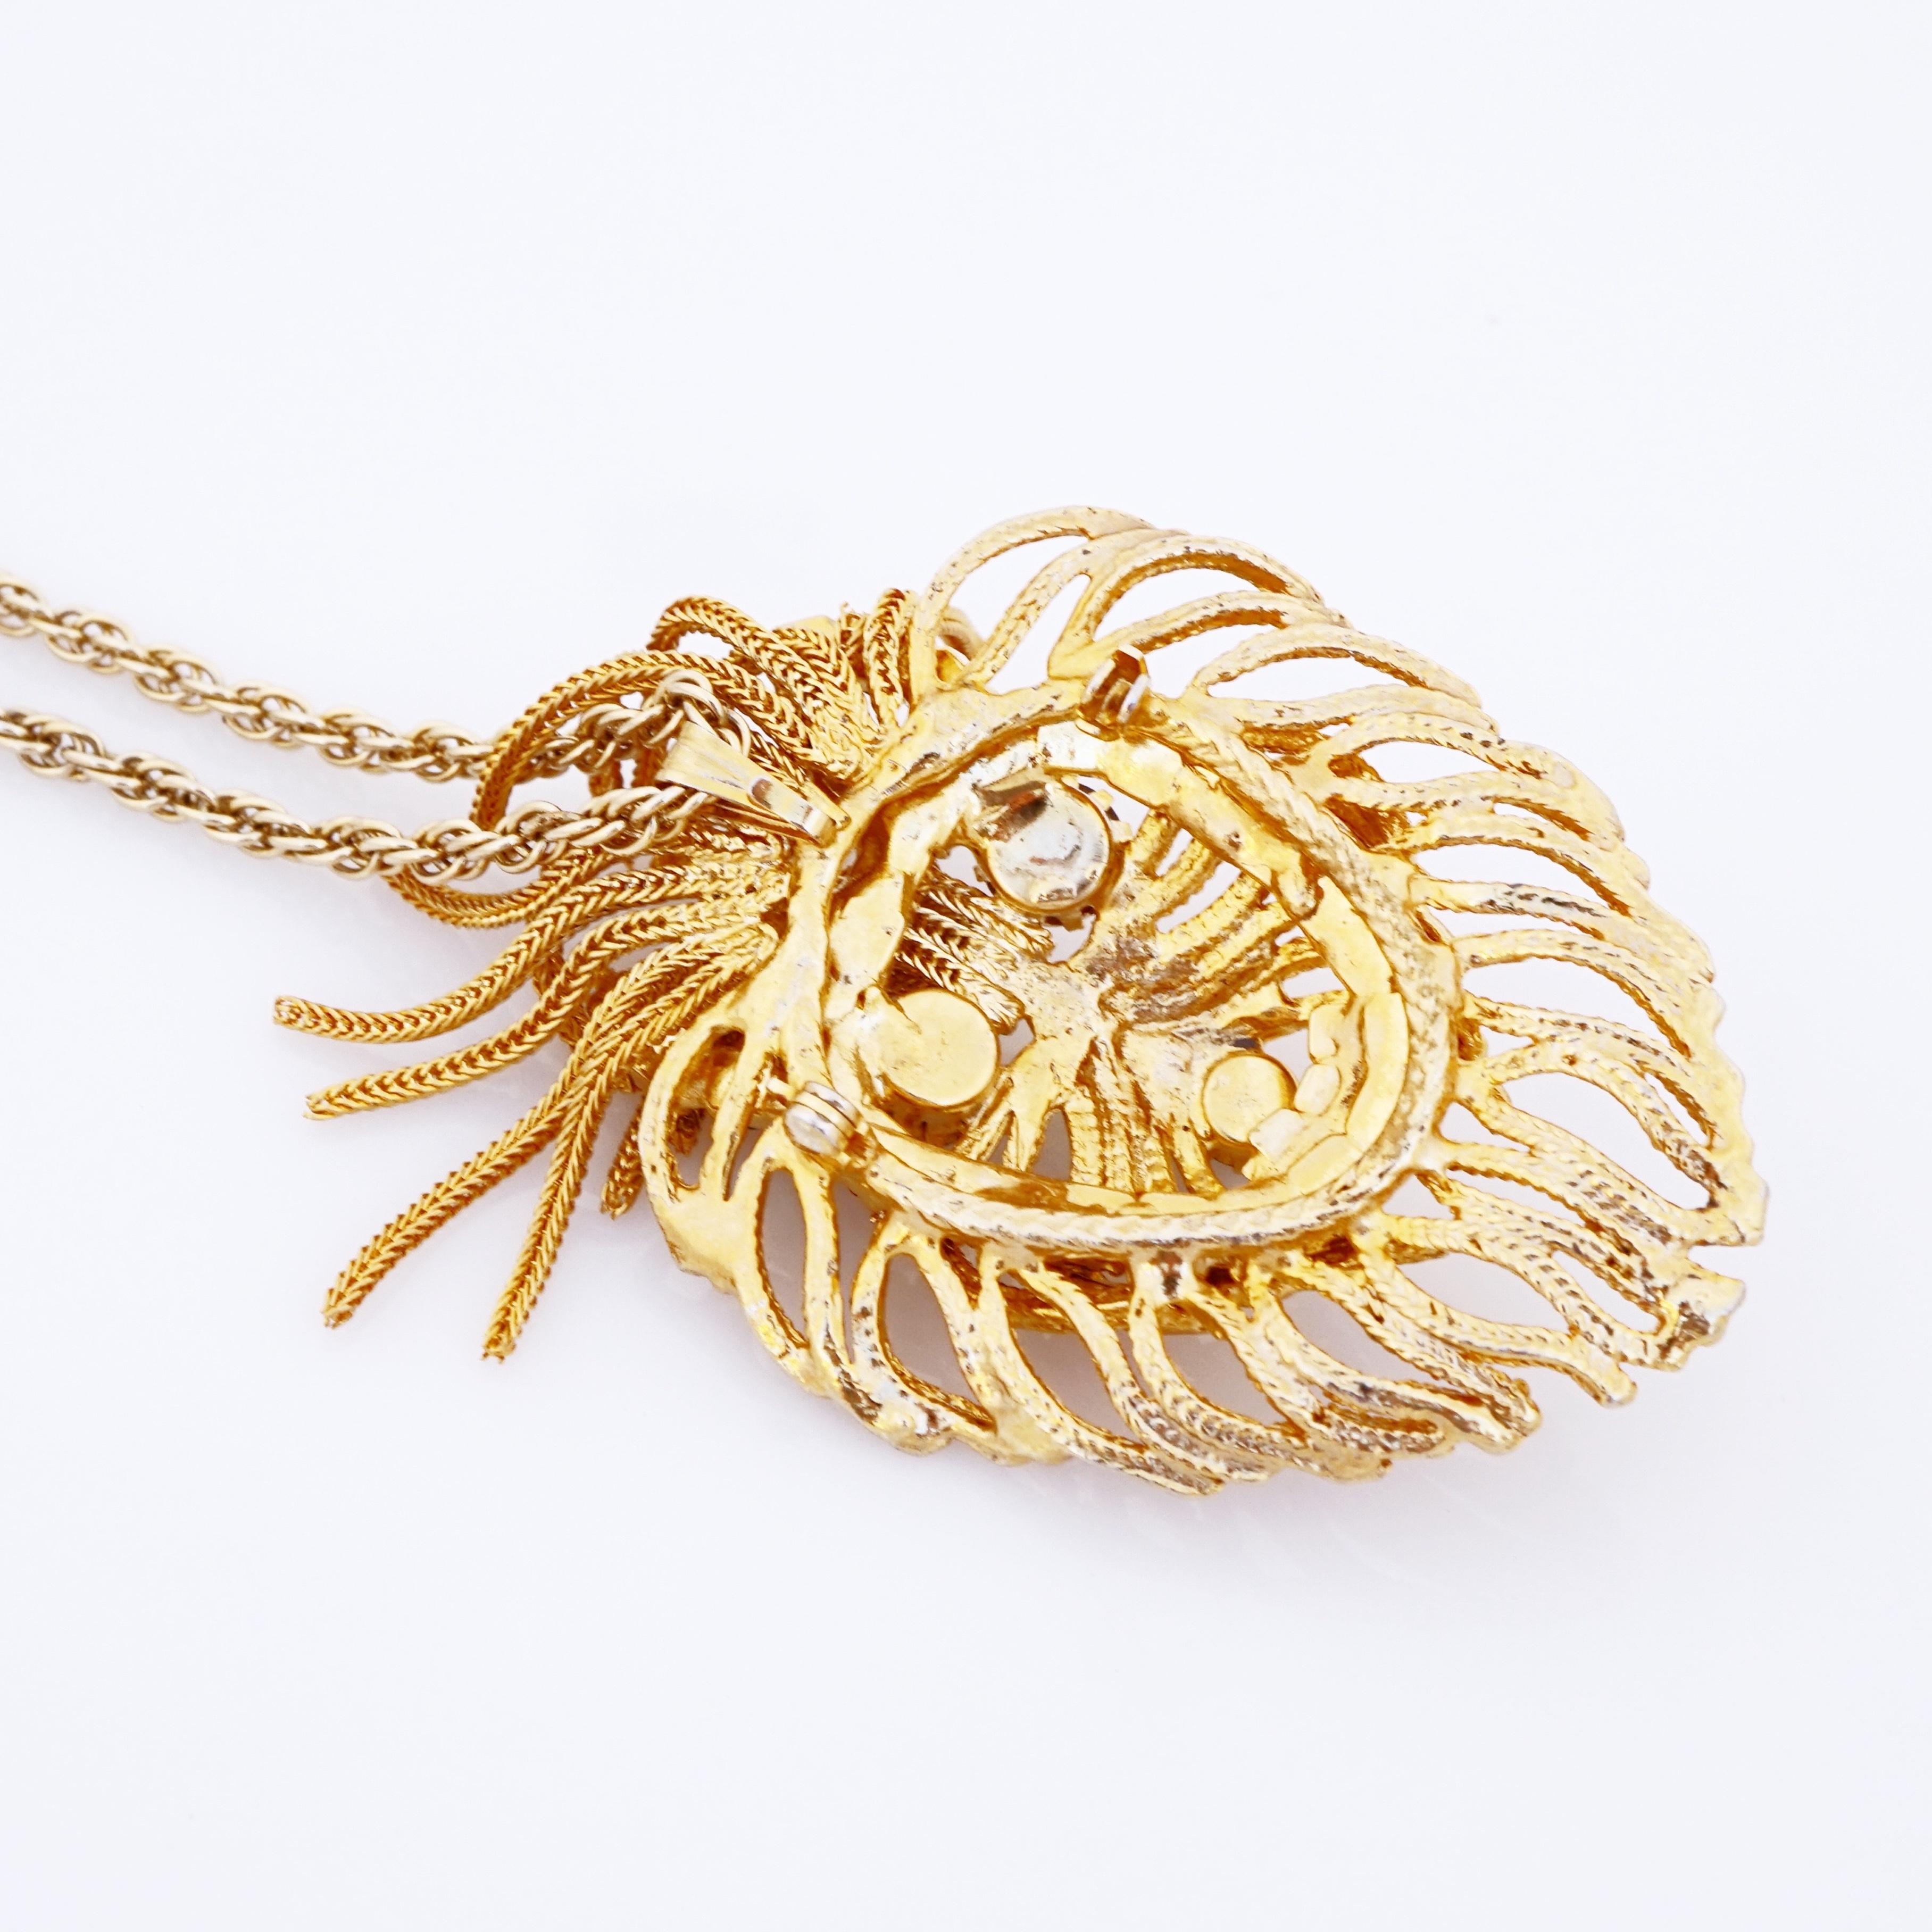 Gold Chain Shaggy Dog Pendant Necklace By Dominique, 1960s In Good Condition For Sale In McKinney, TX